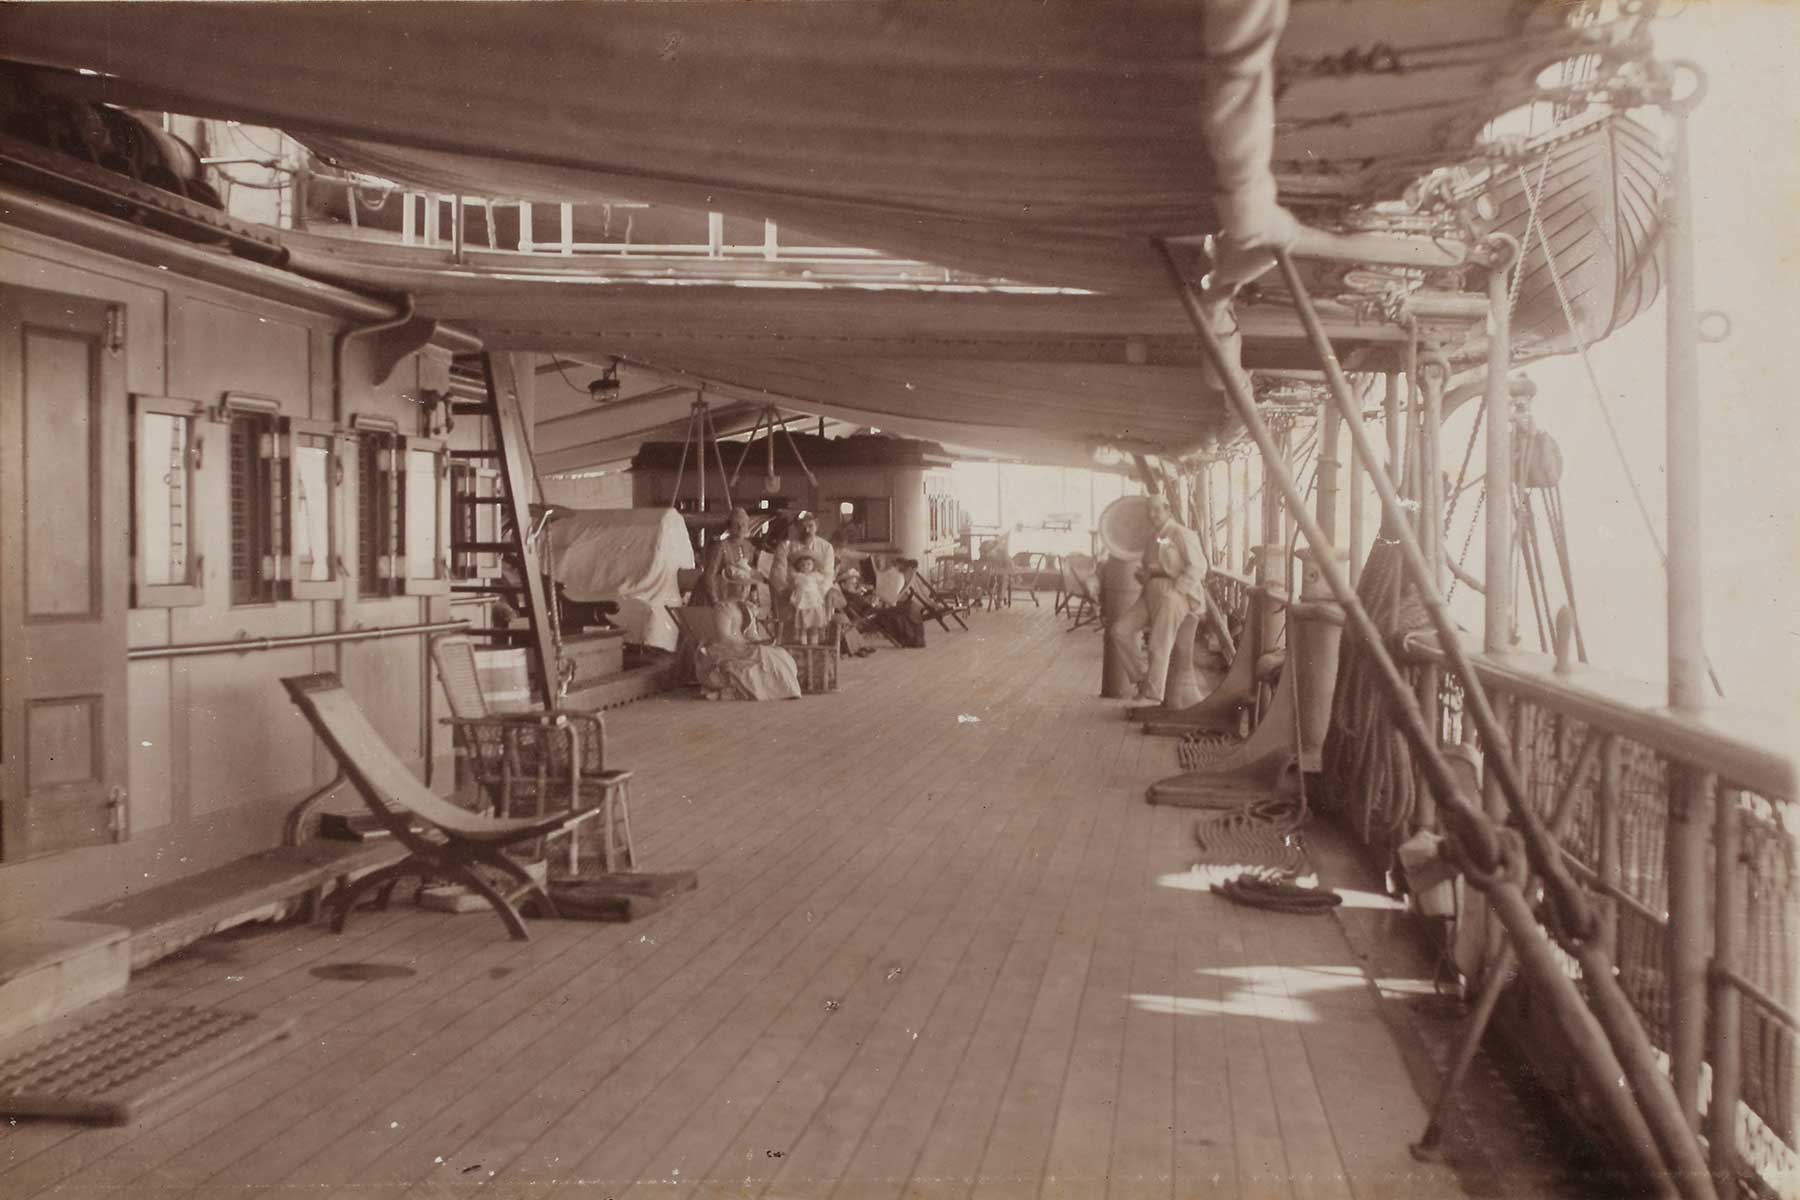 Passengers on the Quarter Deck, SS Chusan, in the Bay of Bengal, December 1890